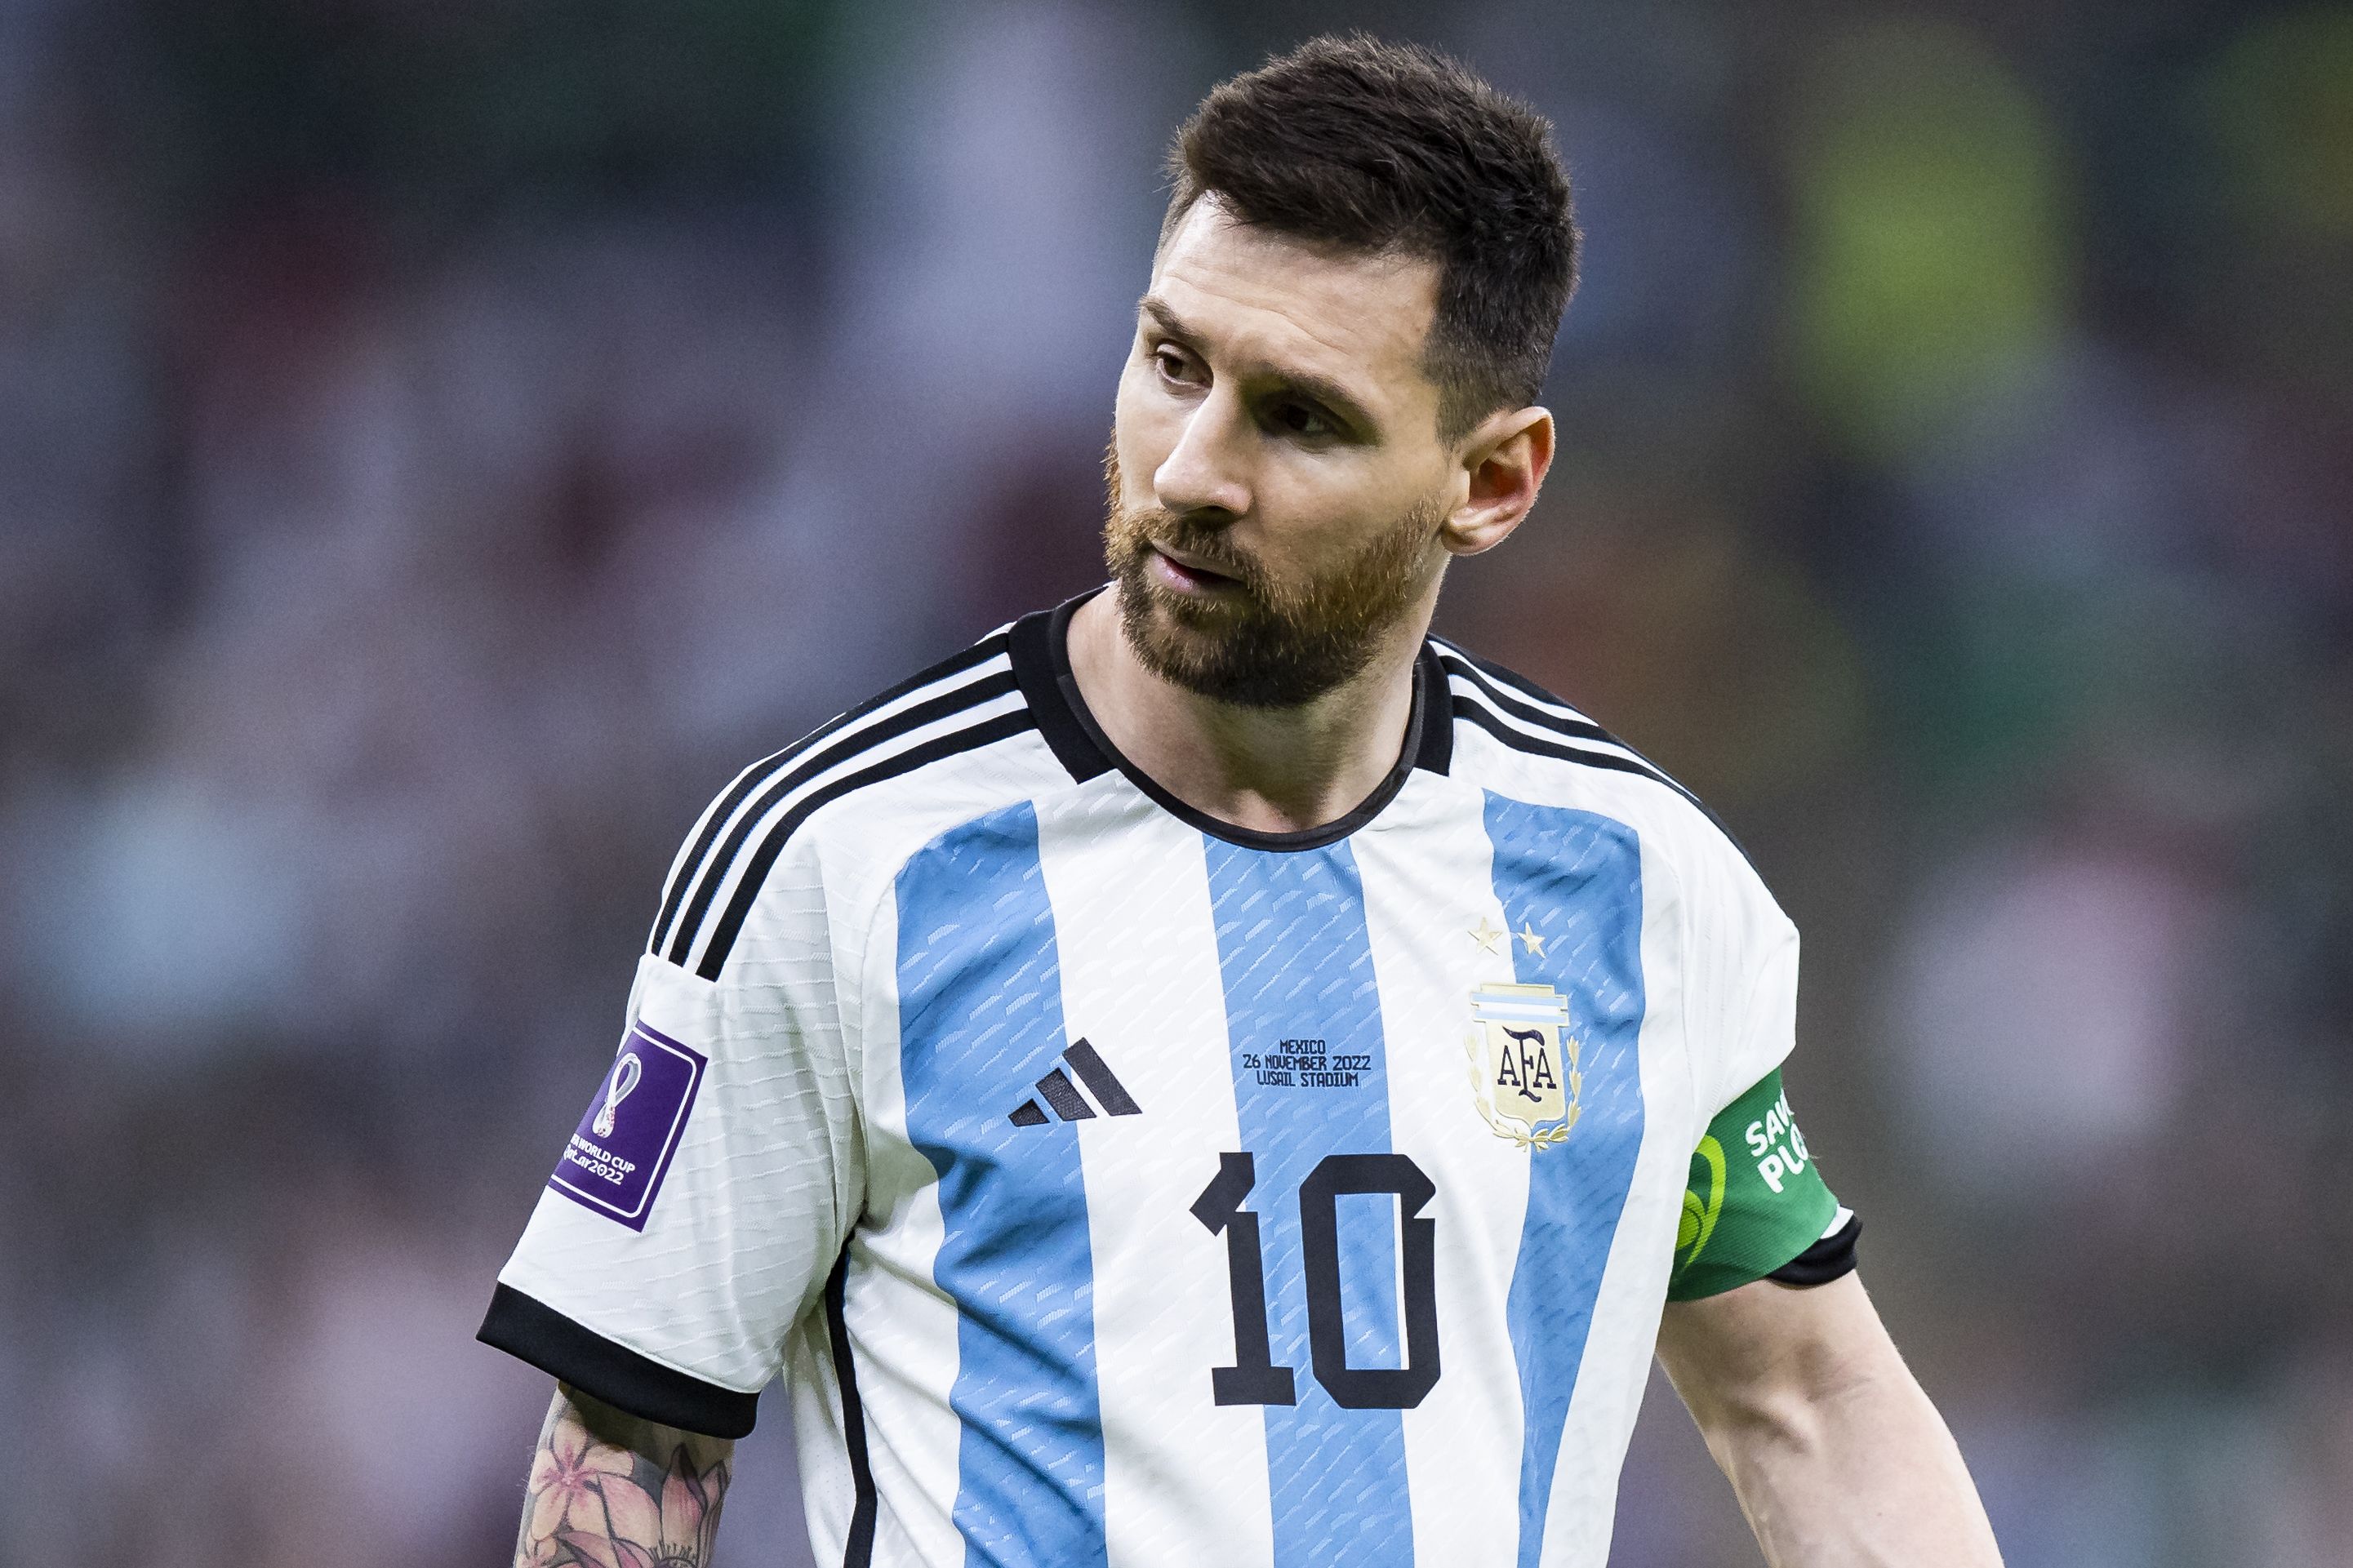 The four options Lionel Messi has for next season